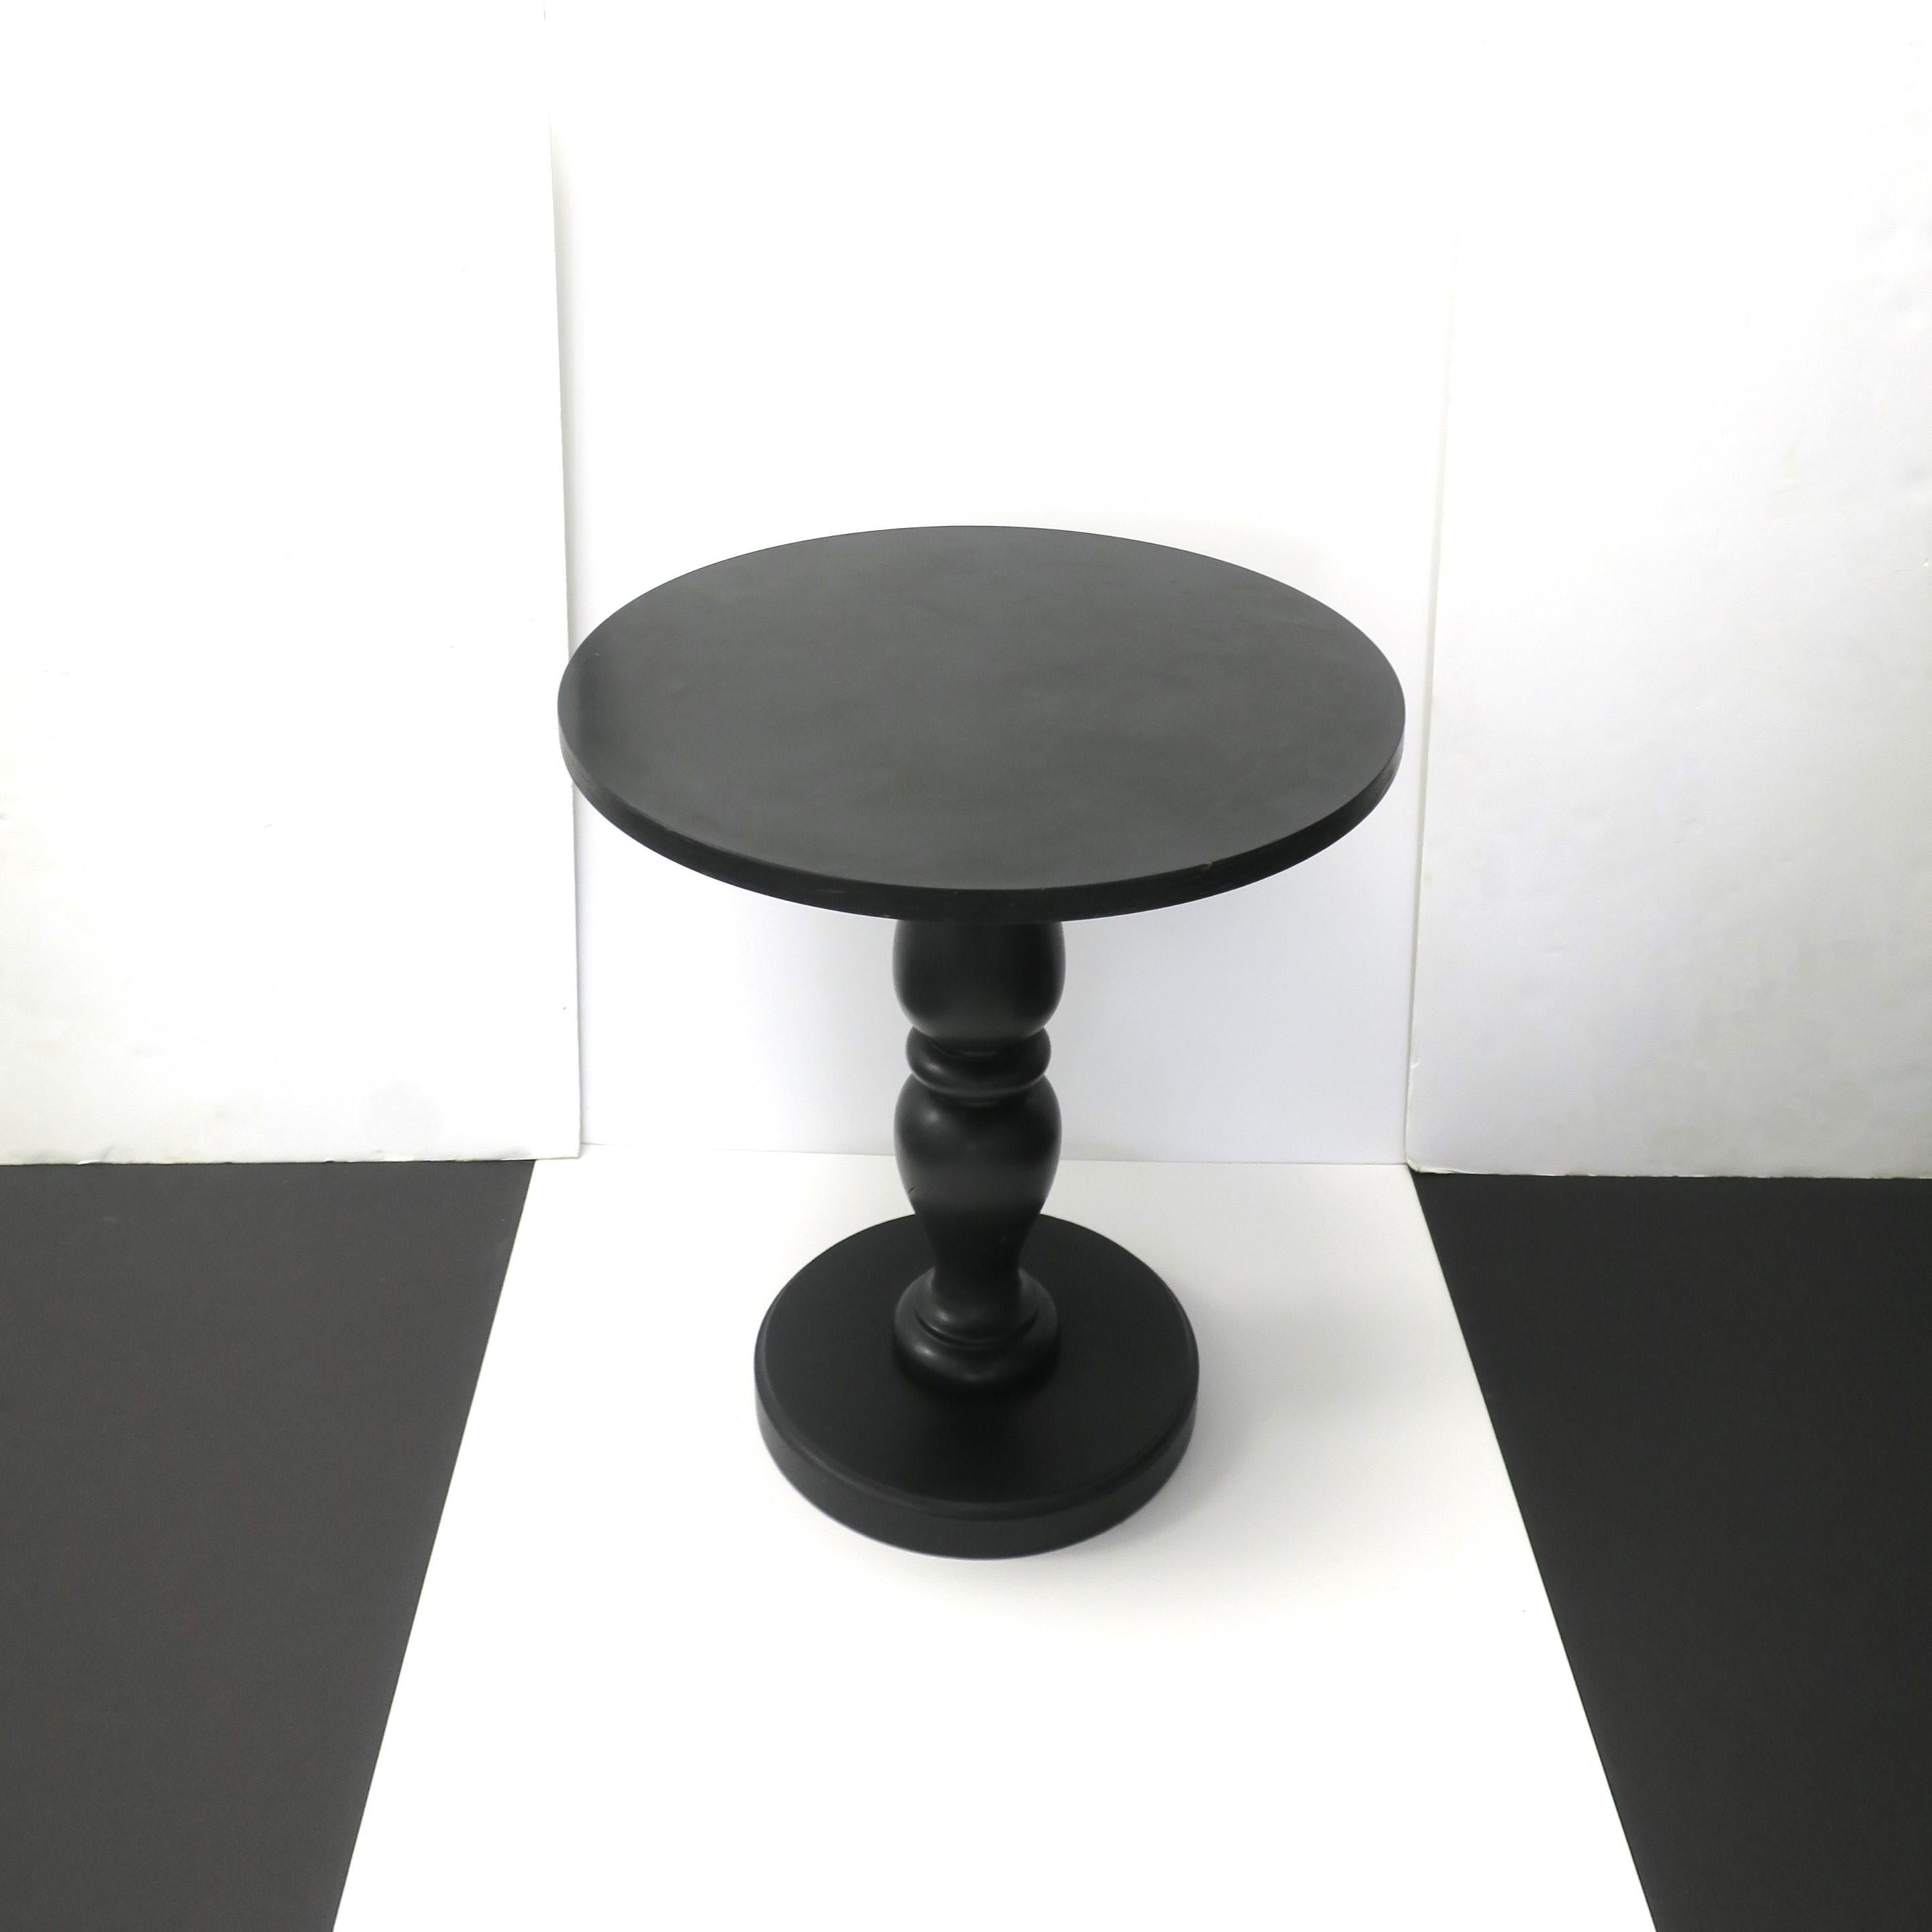 A round black side or accent table with turned base, circa late-20th century, 1970s. Table has a high-gloss black laminate top over a wood top and a flat or matte finish turned wood neck and base. Dimensions: 22